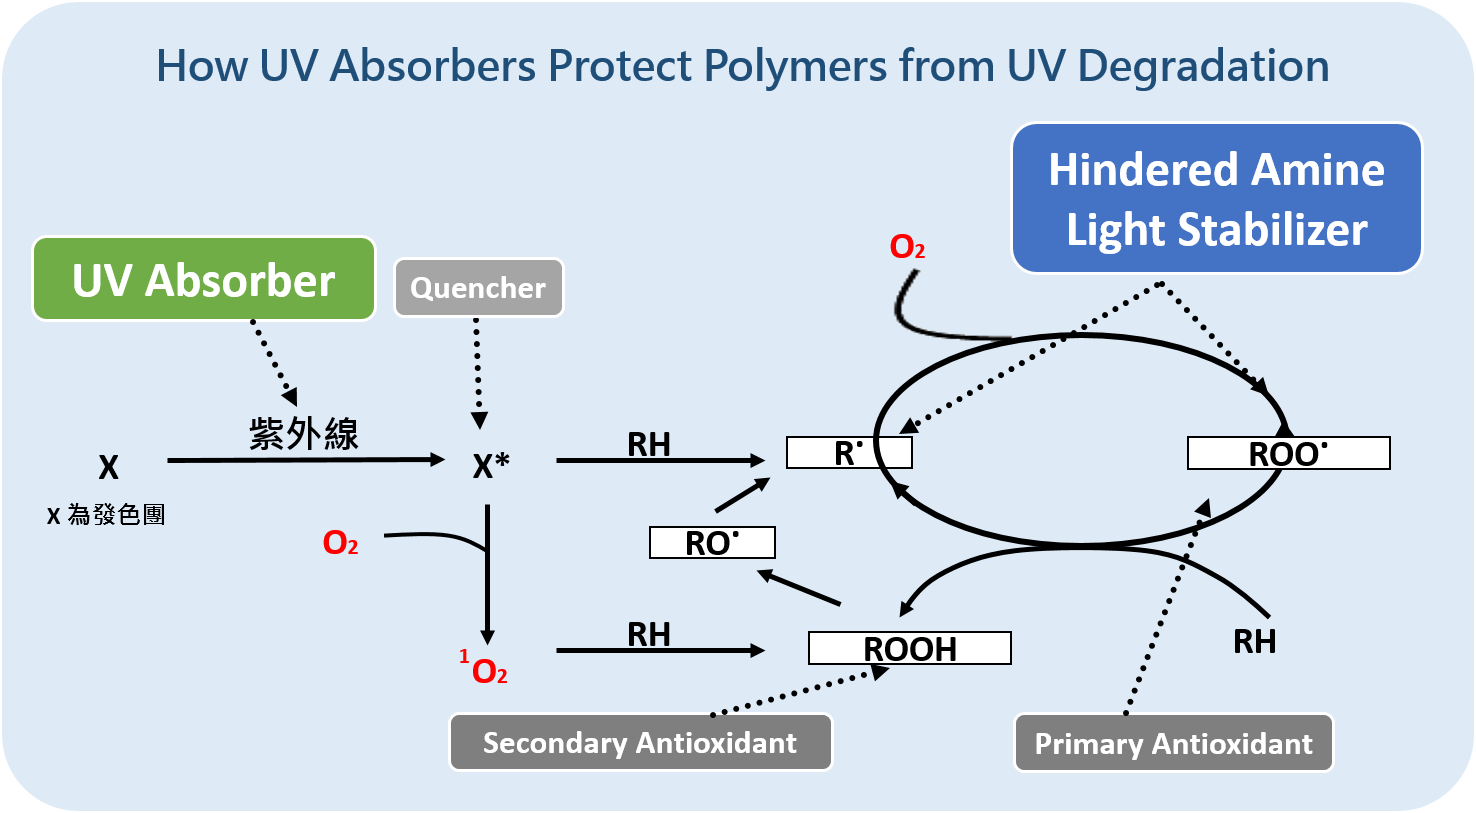 How UV Absorbers Protect Polymers from UV Degradation